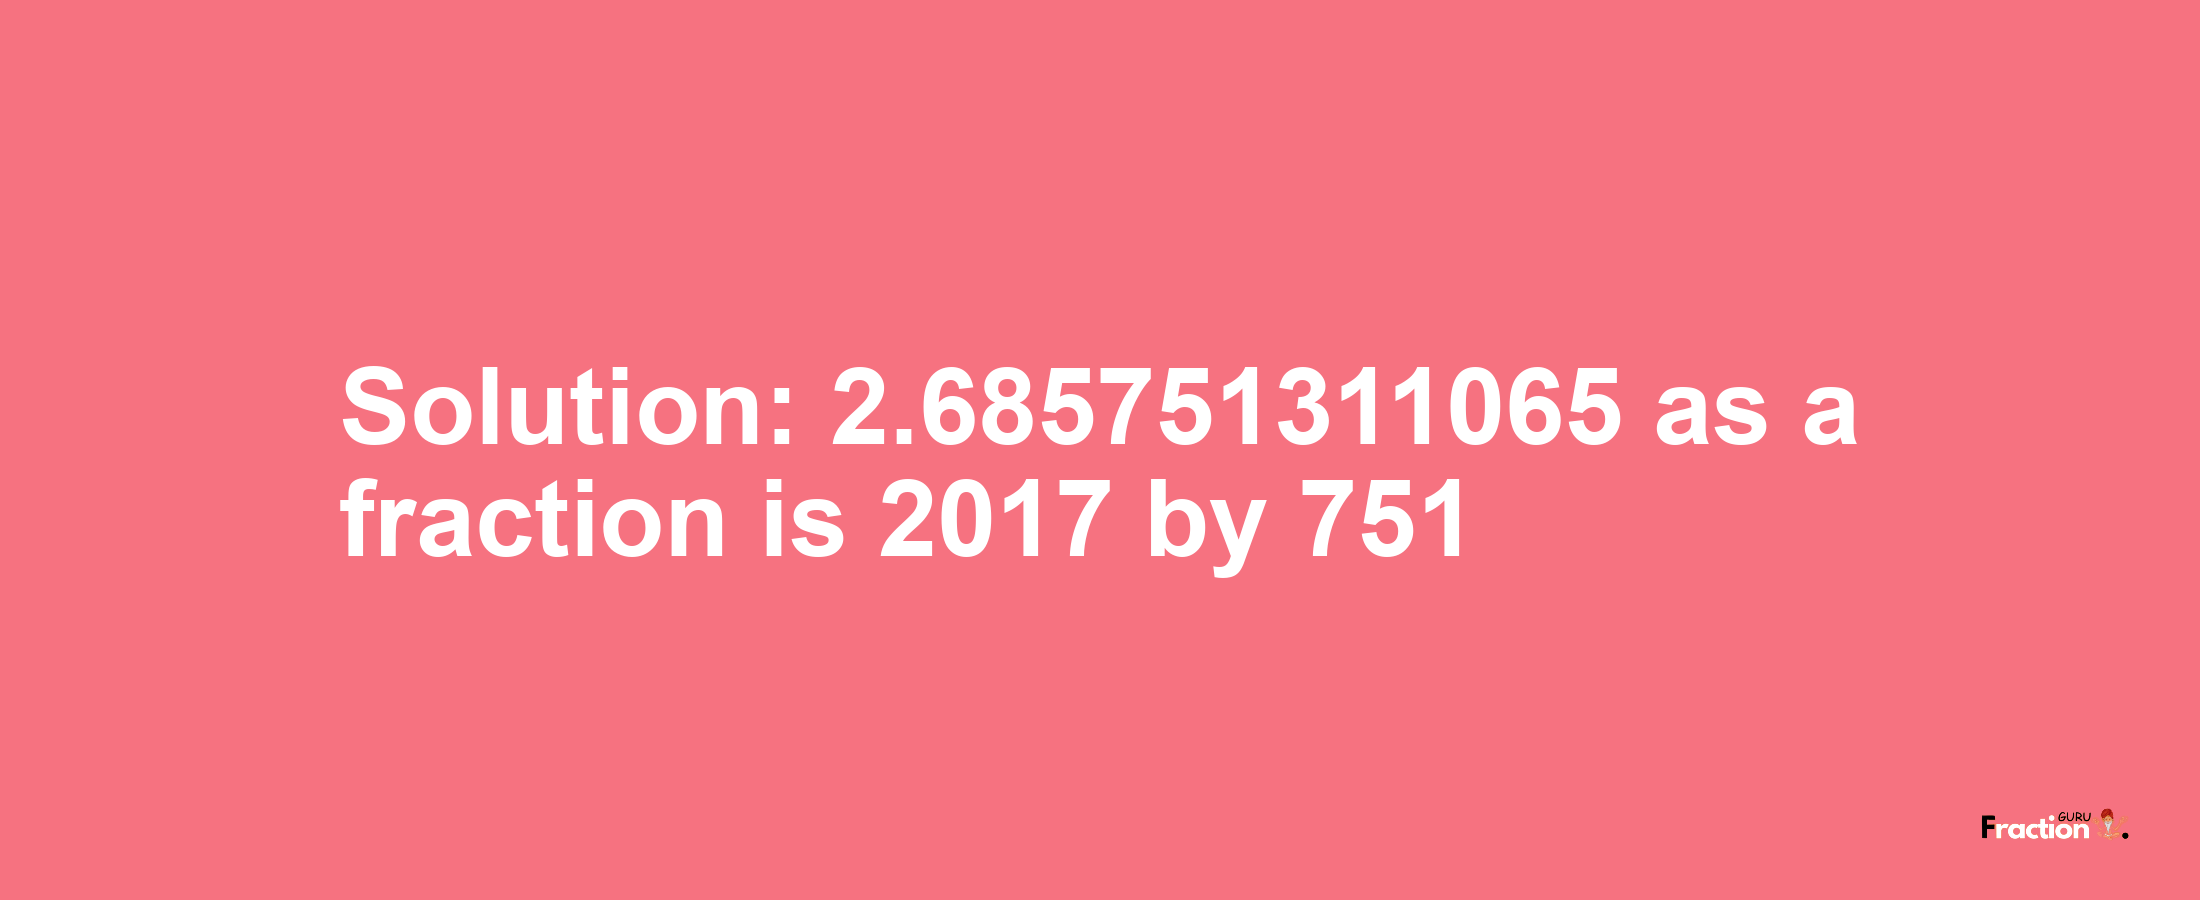 Solution:2.685751311065 as a fraction is 2017/751